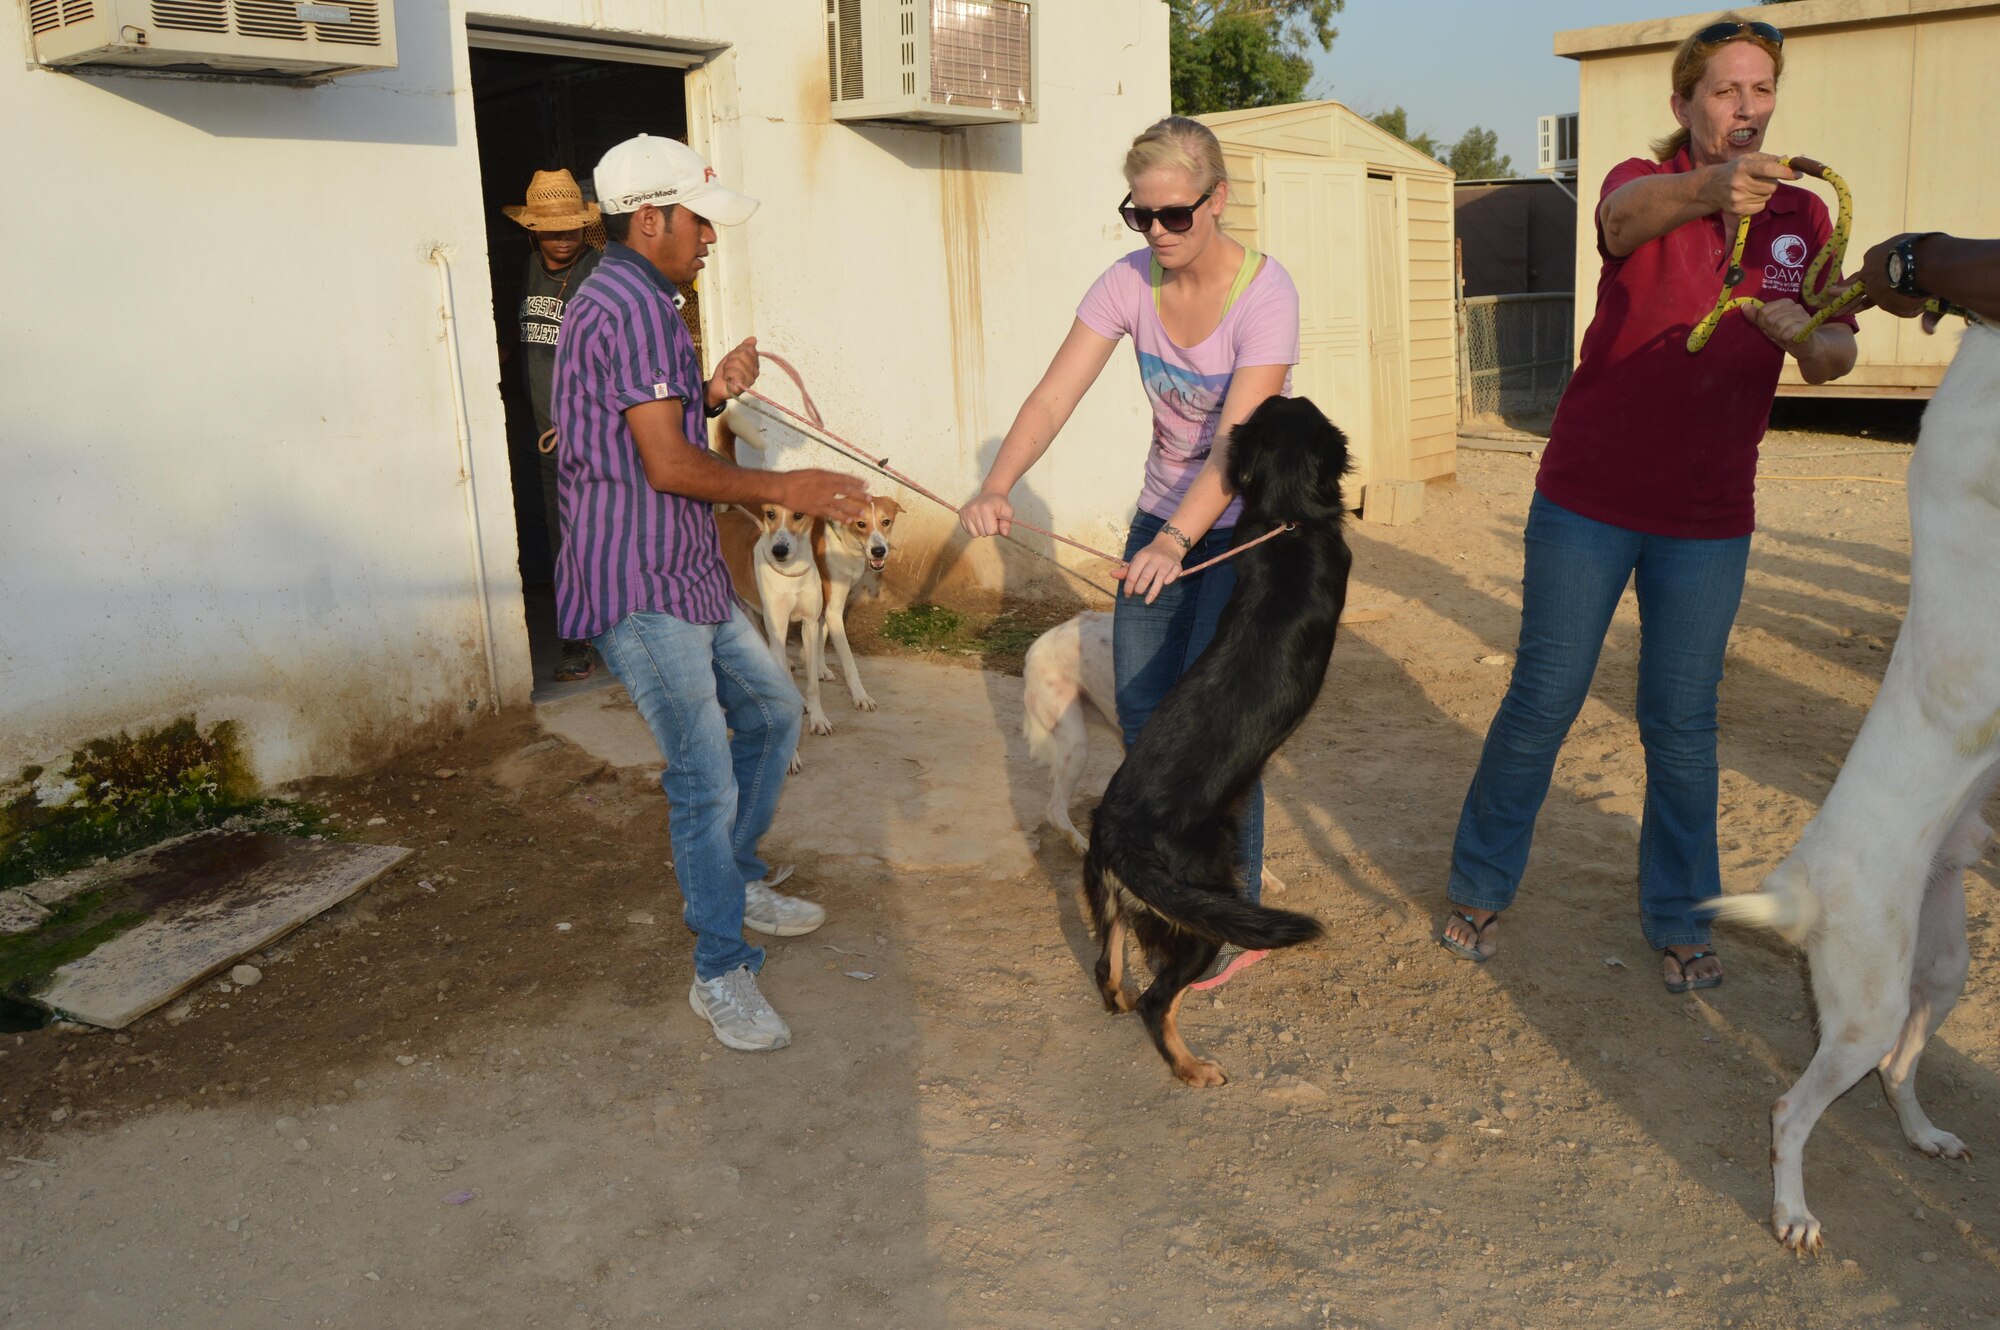 Staff Sgt.  Jacqueline Bongard, 379 Expeditionary Contracting Squadron, works with the Qatar Animal Welfare Society staff to prepare the dogs for a daily walk August 15, 2015 Ar-Rayyan, Qatar. Volunteers come out to share the workload and provide friendly interaction for the rescued K-9’s while keeping them active and healthy. (U.S. Air Force photo by Senior Airman Alexandria Bandin/Released)